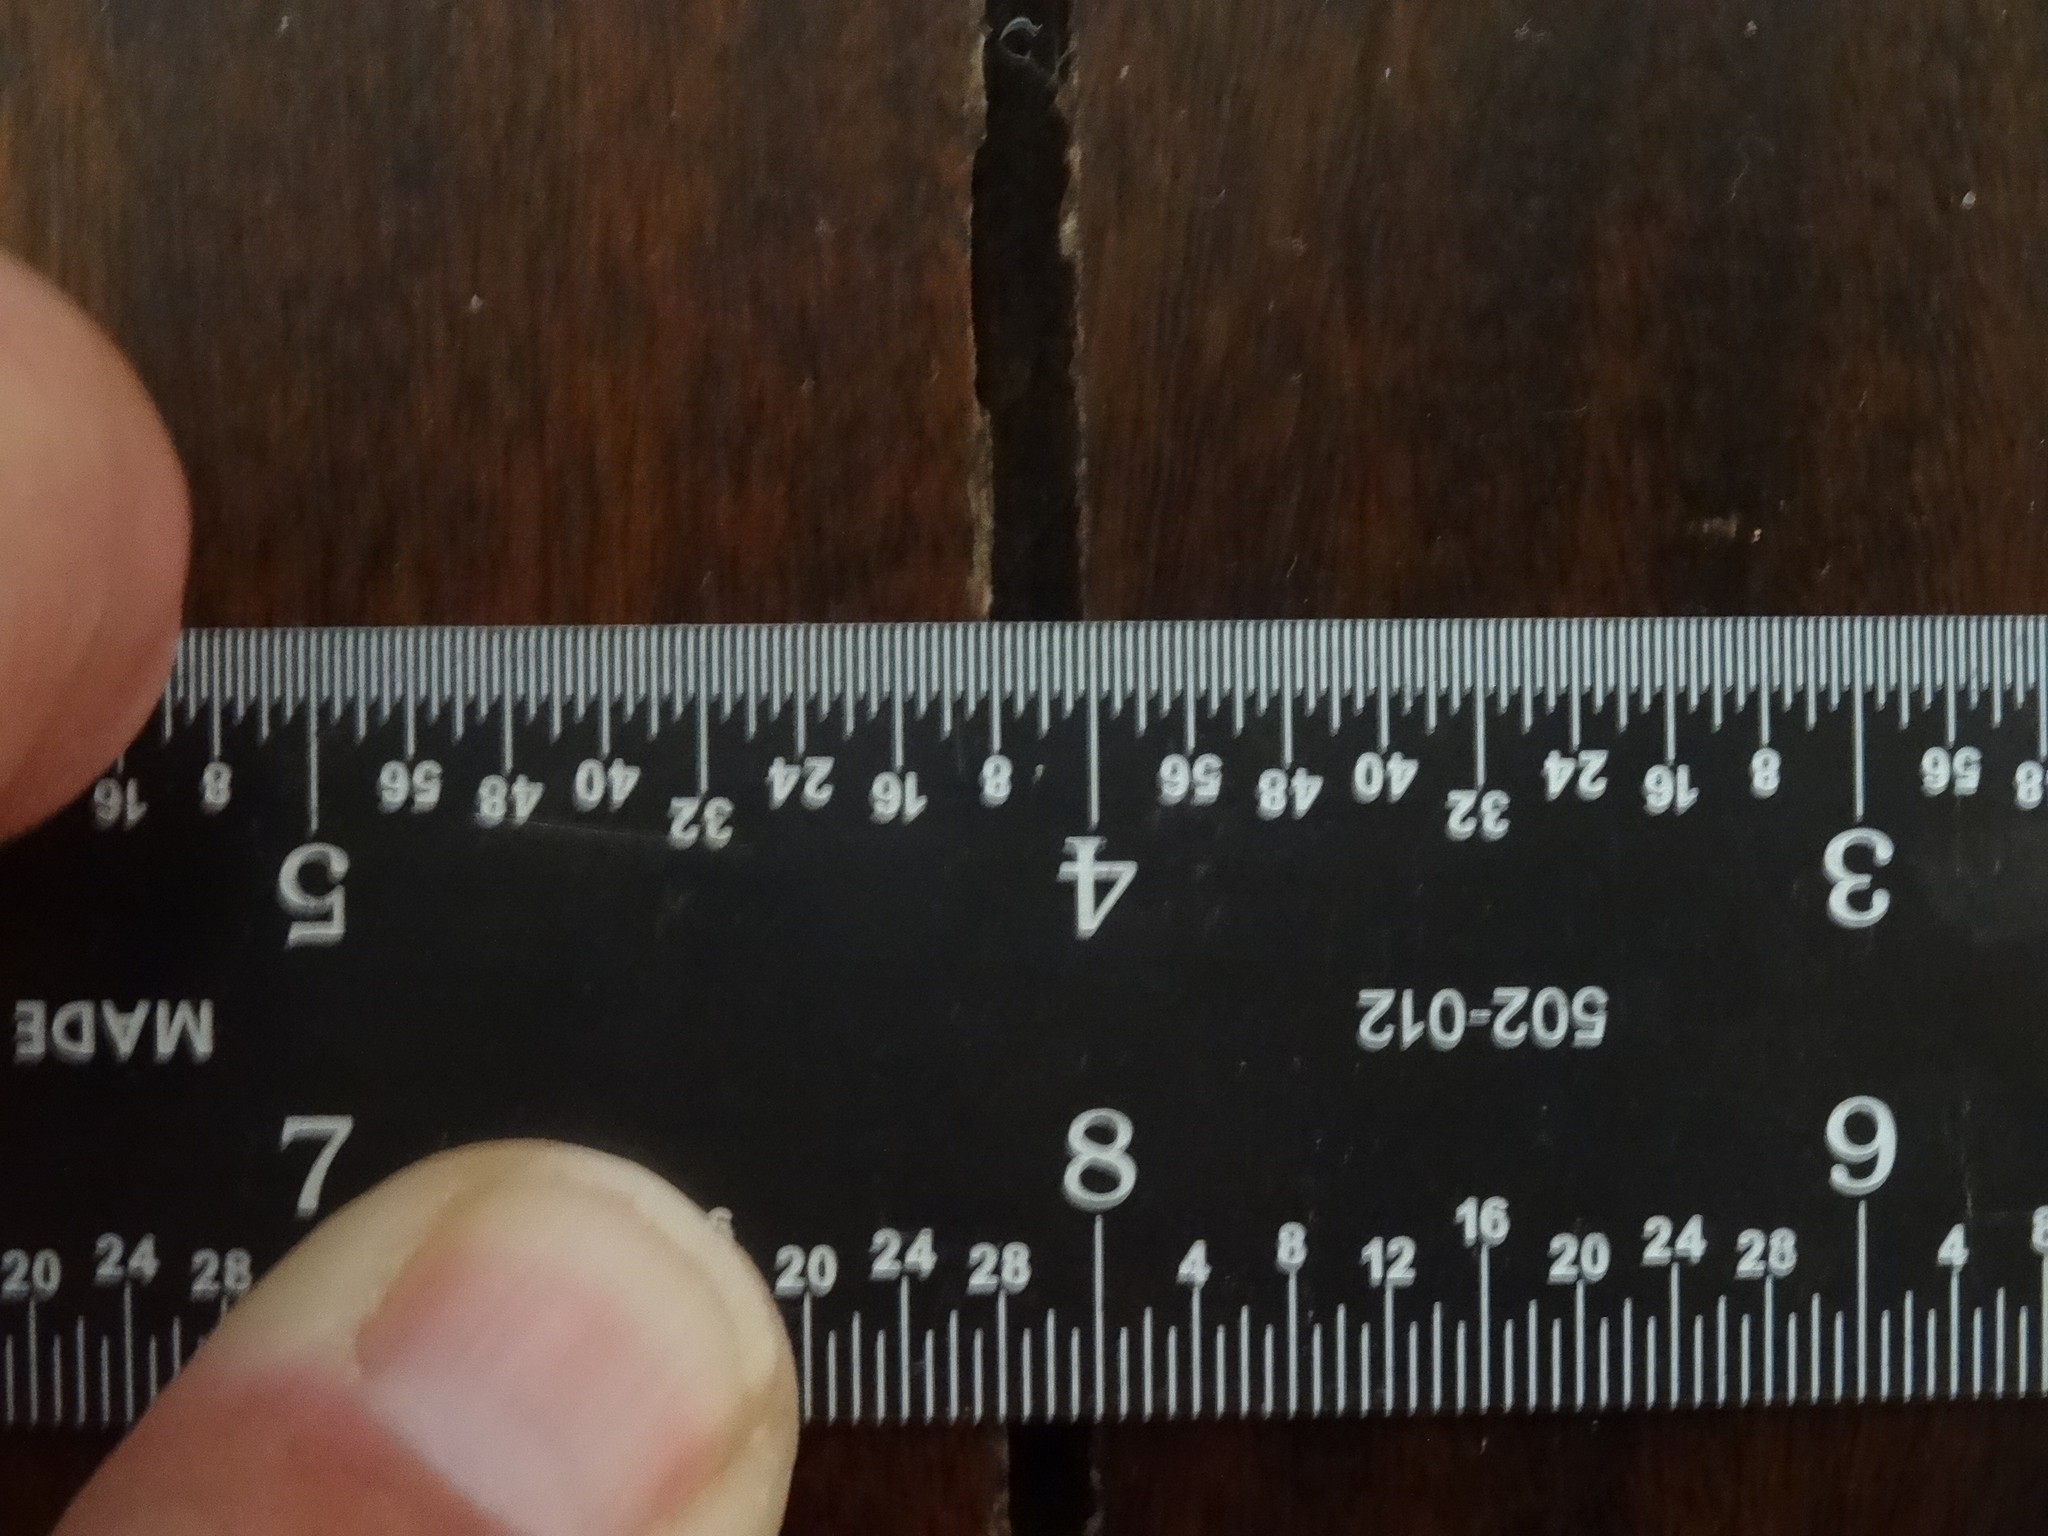 Measuring board width to determine if shrinkage occurred